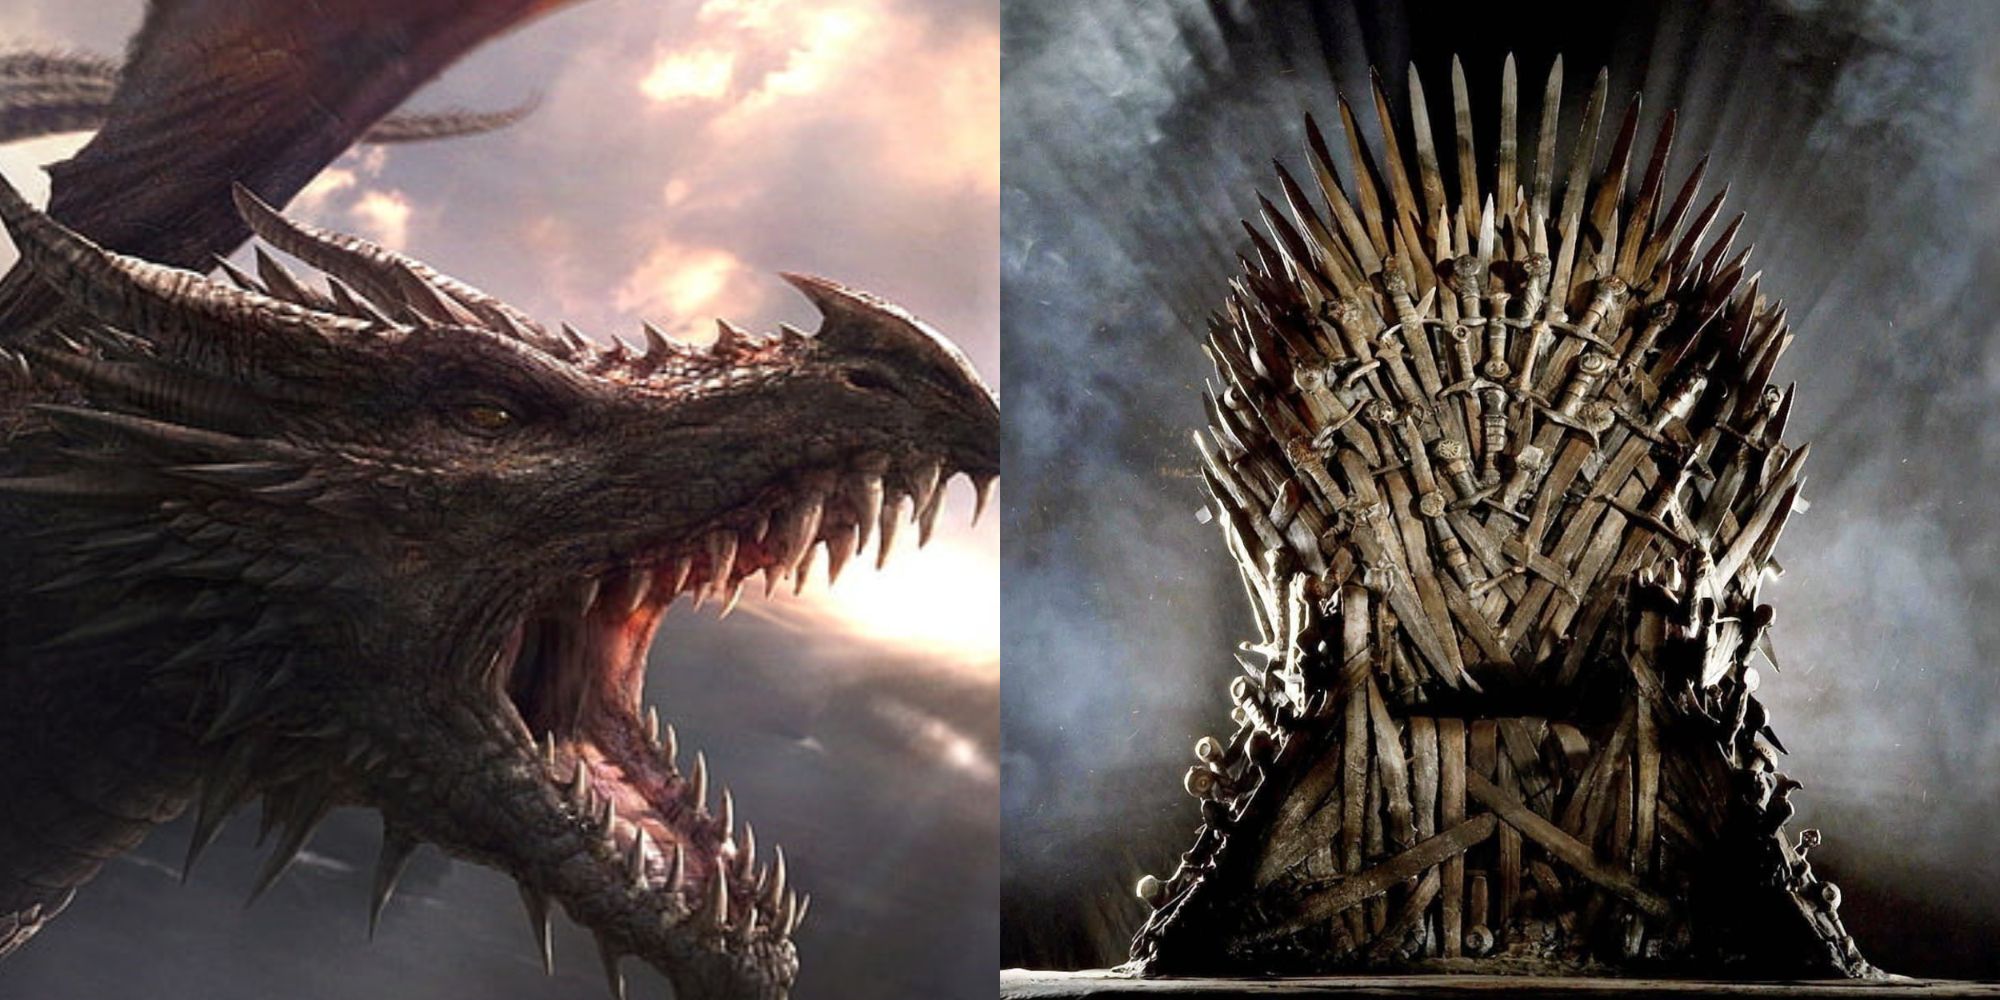 An image of Balerion screaming and the Iron Throne in House of the Dragon